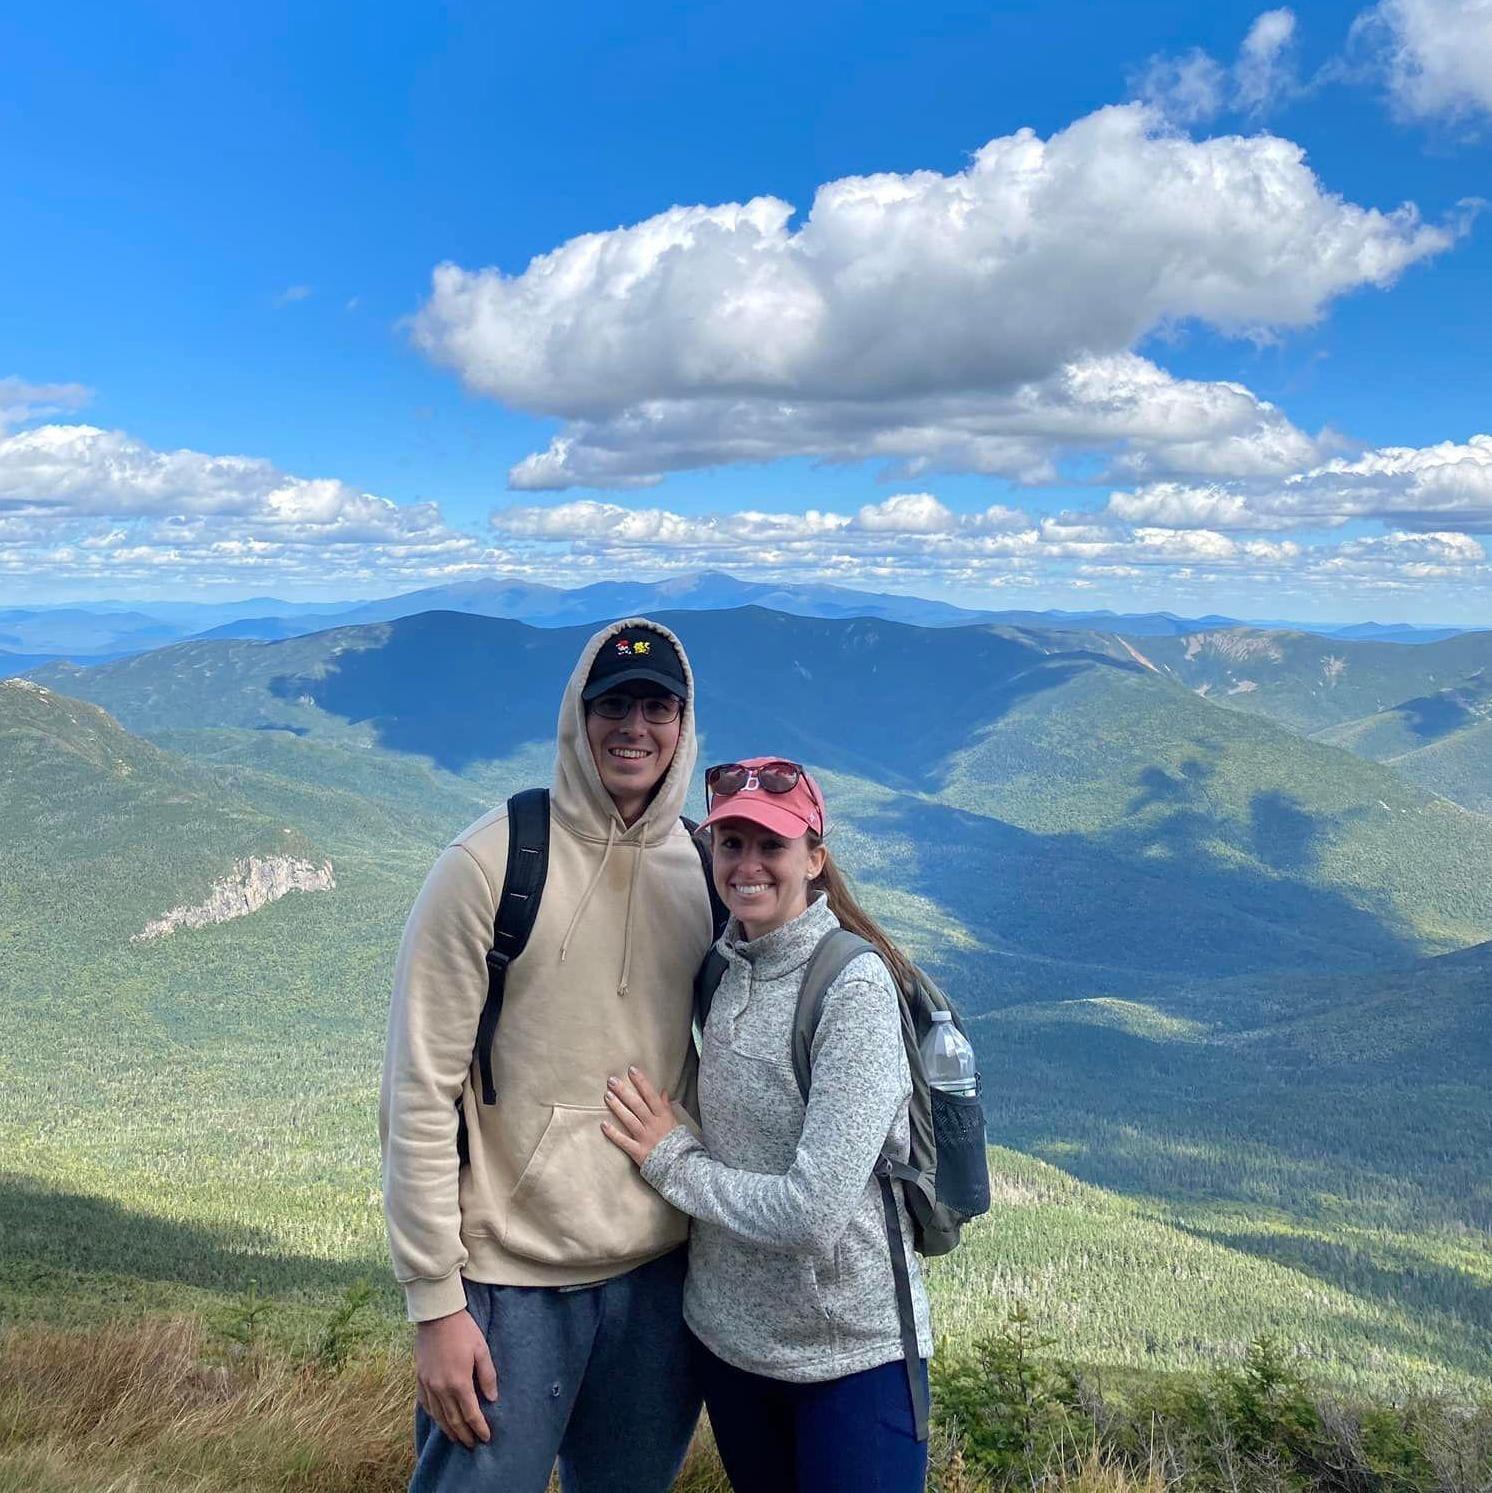 First trip together! Mt. Lafayette in NH